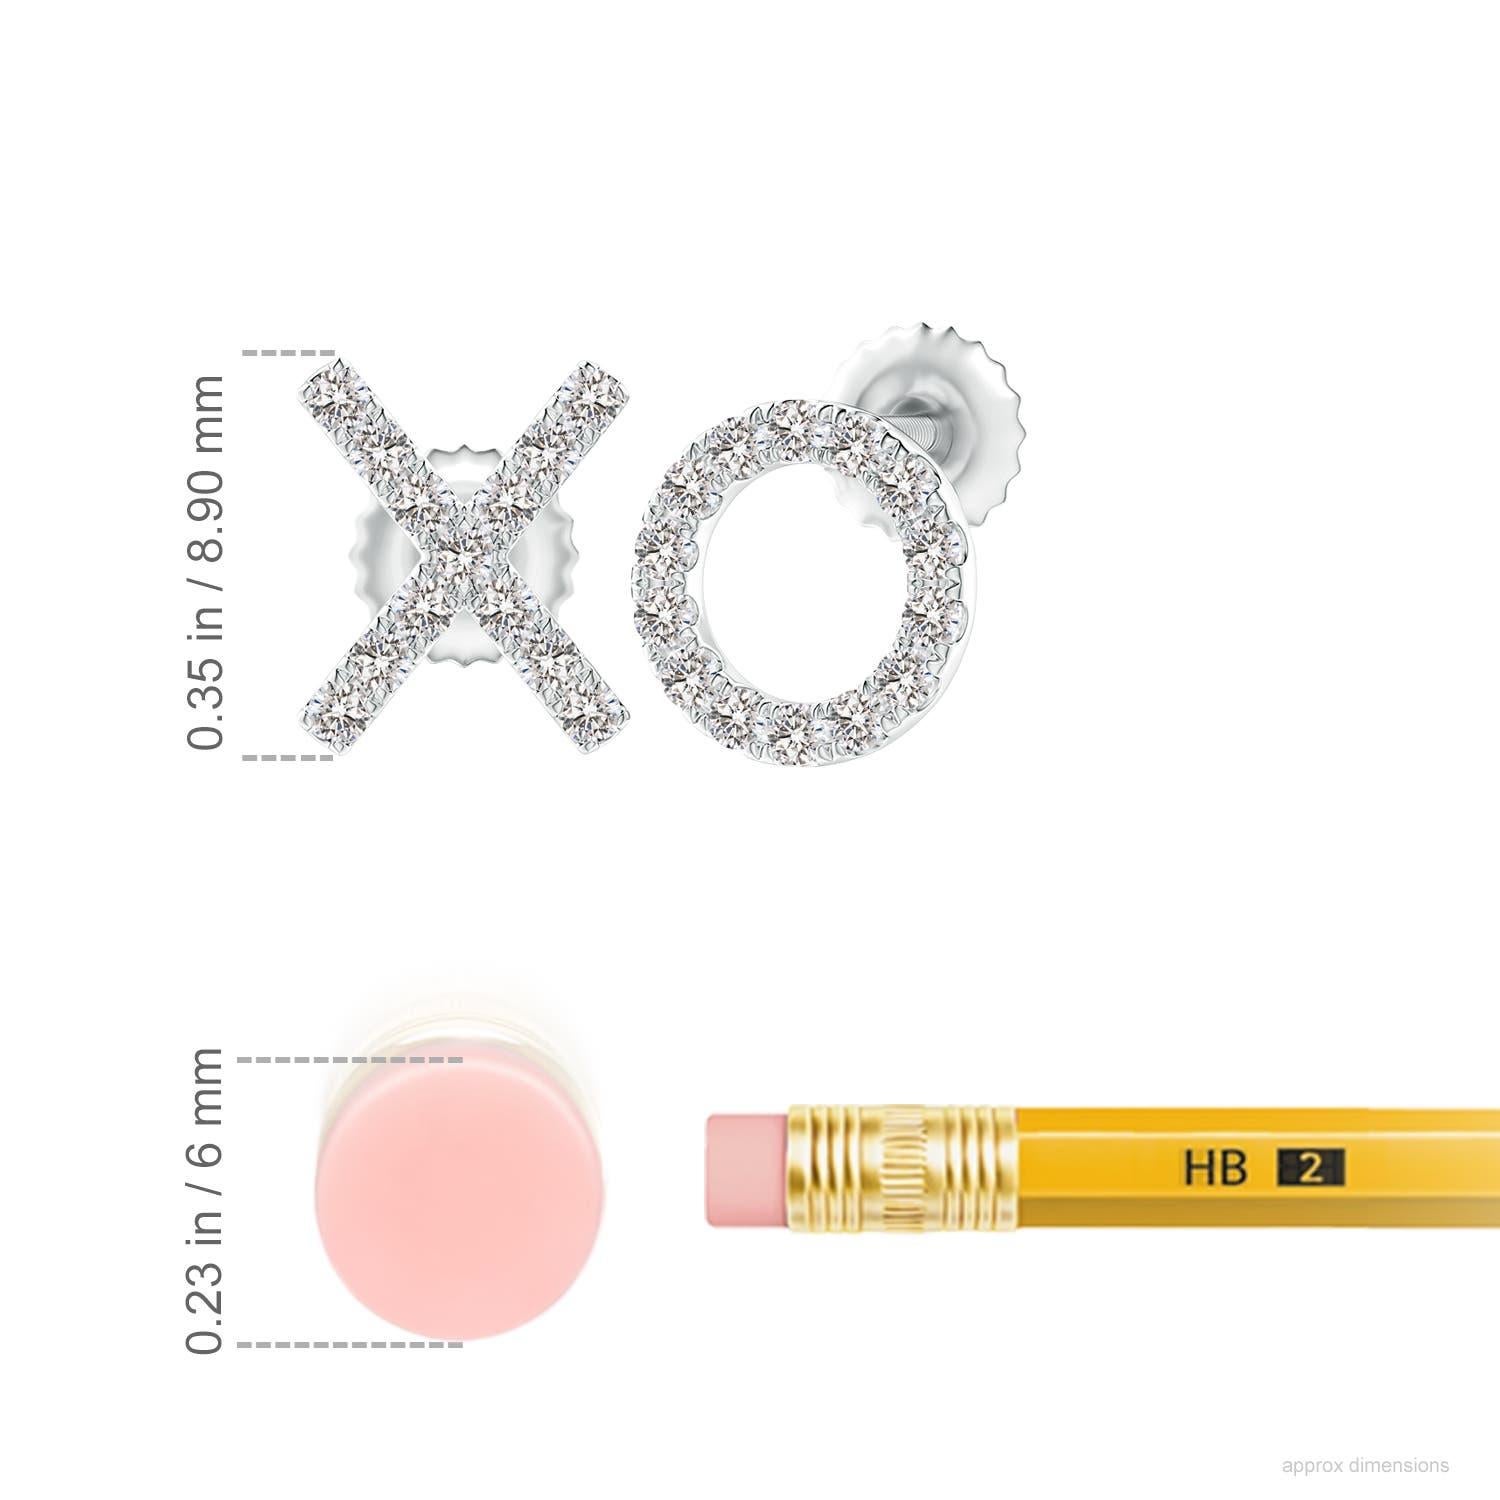 The XO stud earrings designed in 14k white gold are simply fascinating. Sparkling round diamonds in a U pava setting brilliantly embellish the XO pattern, adding a dazzling touch to these adorable stud earrings.
Diamond is the Birthstone for April